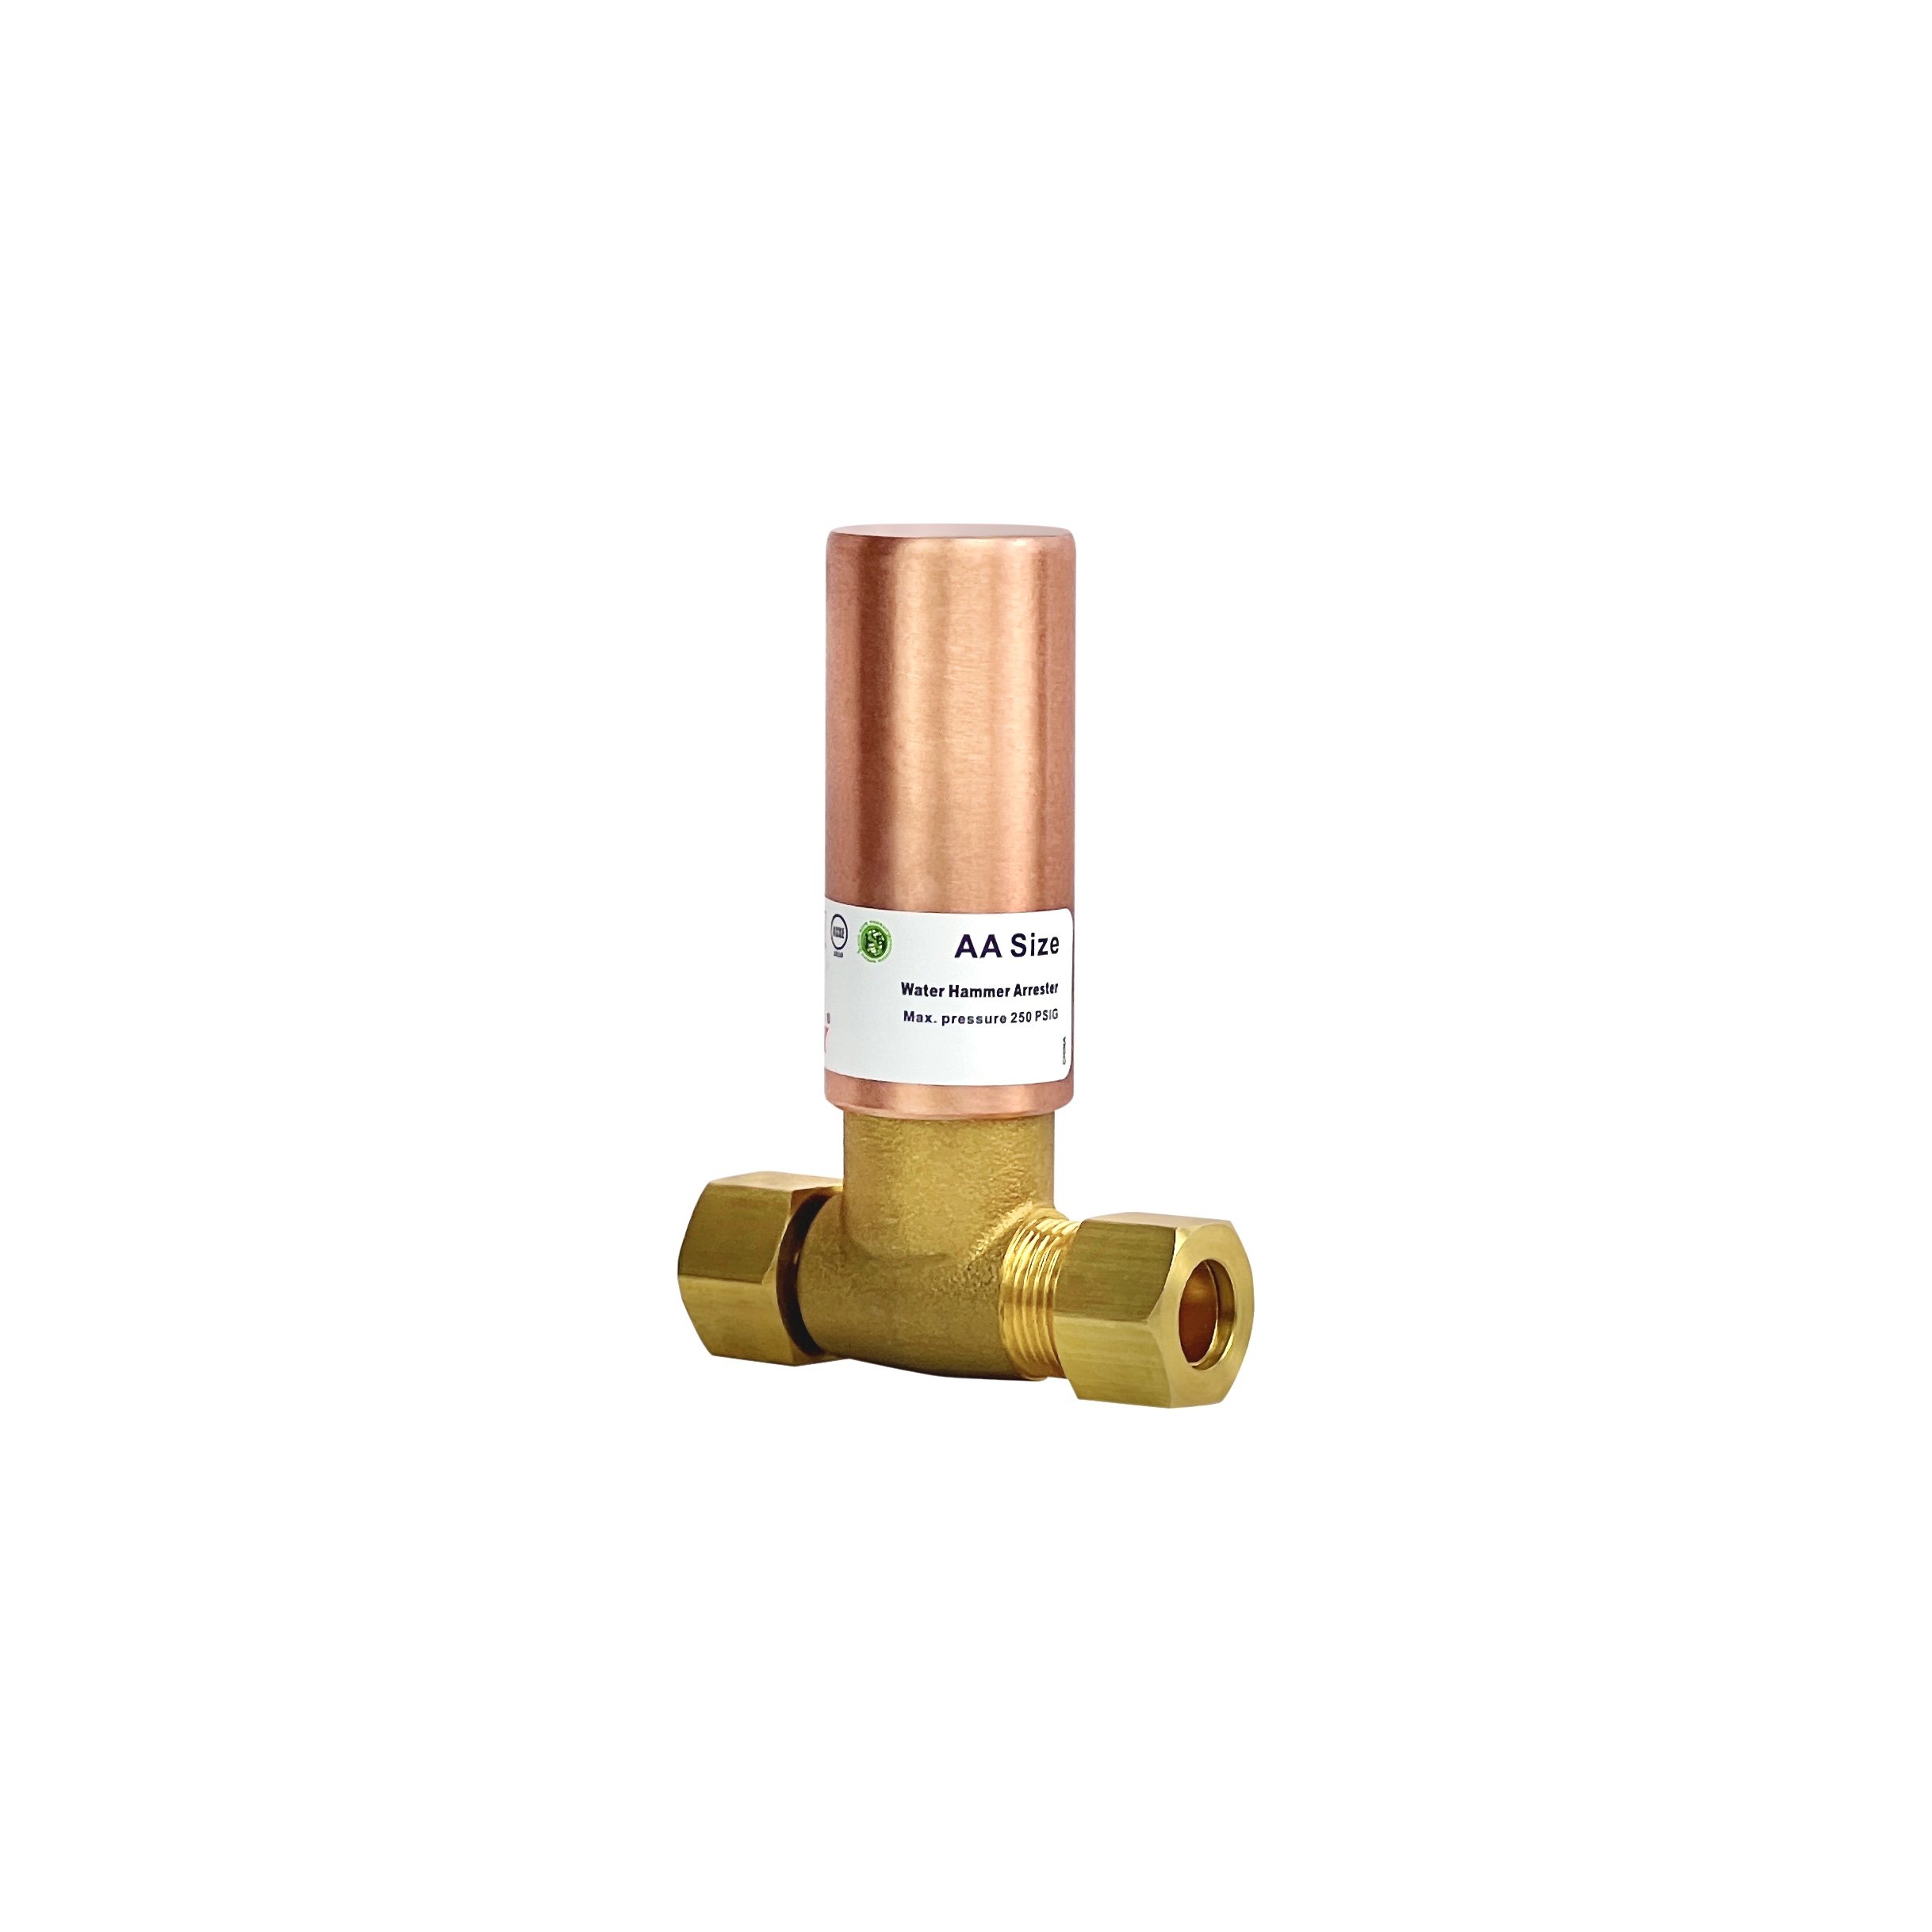 AA Size Copper Water Hammer Arrester 3/8" OD Comp x 3/8" FEM Comp Tee Lead Free Compact